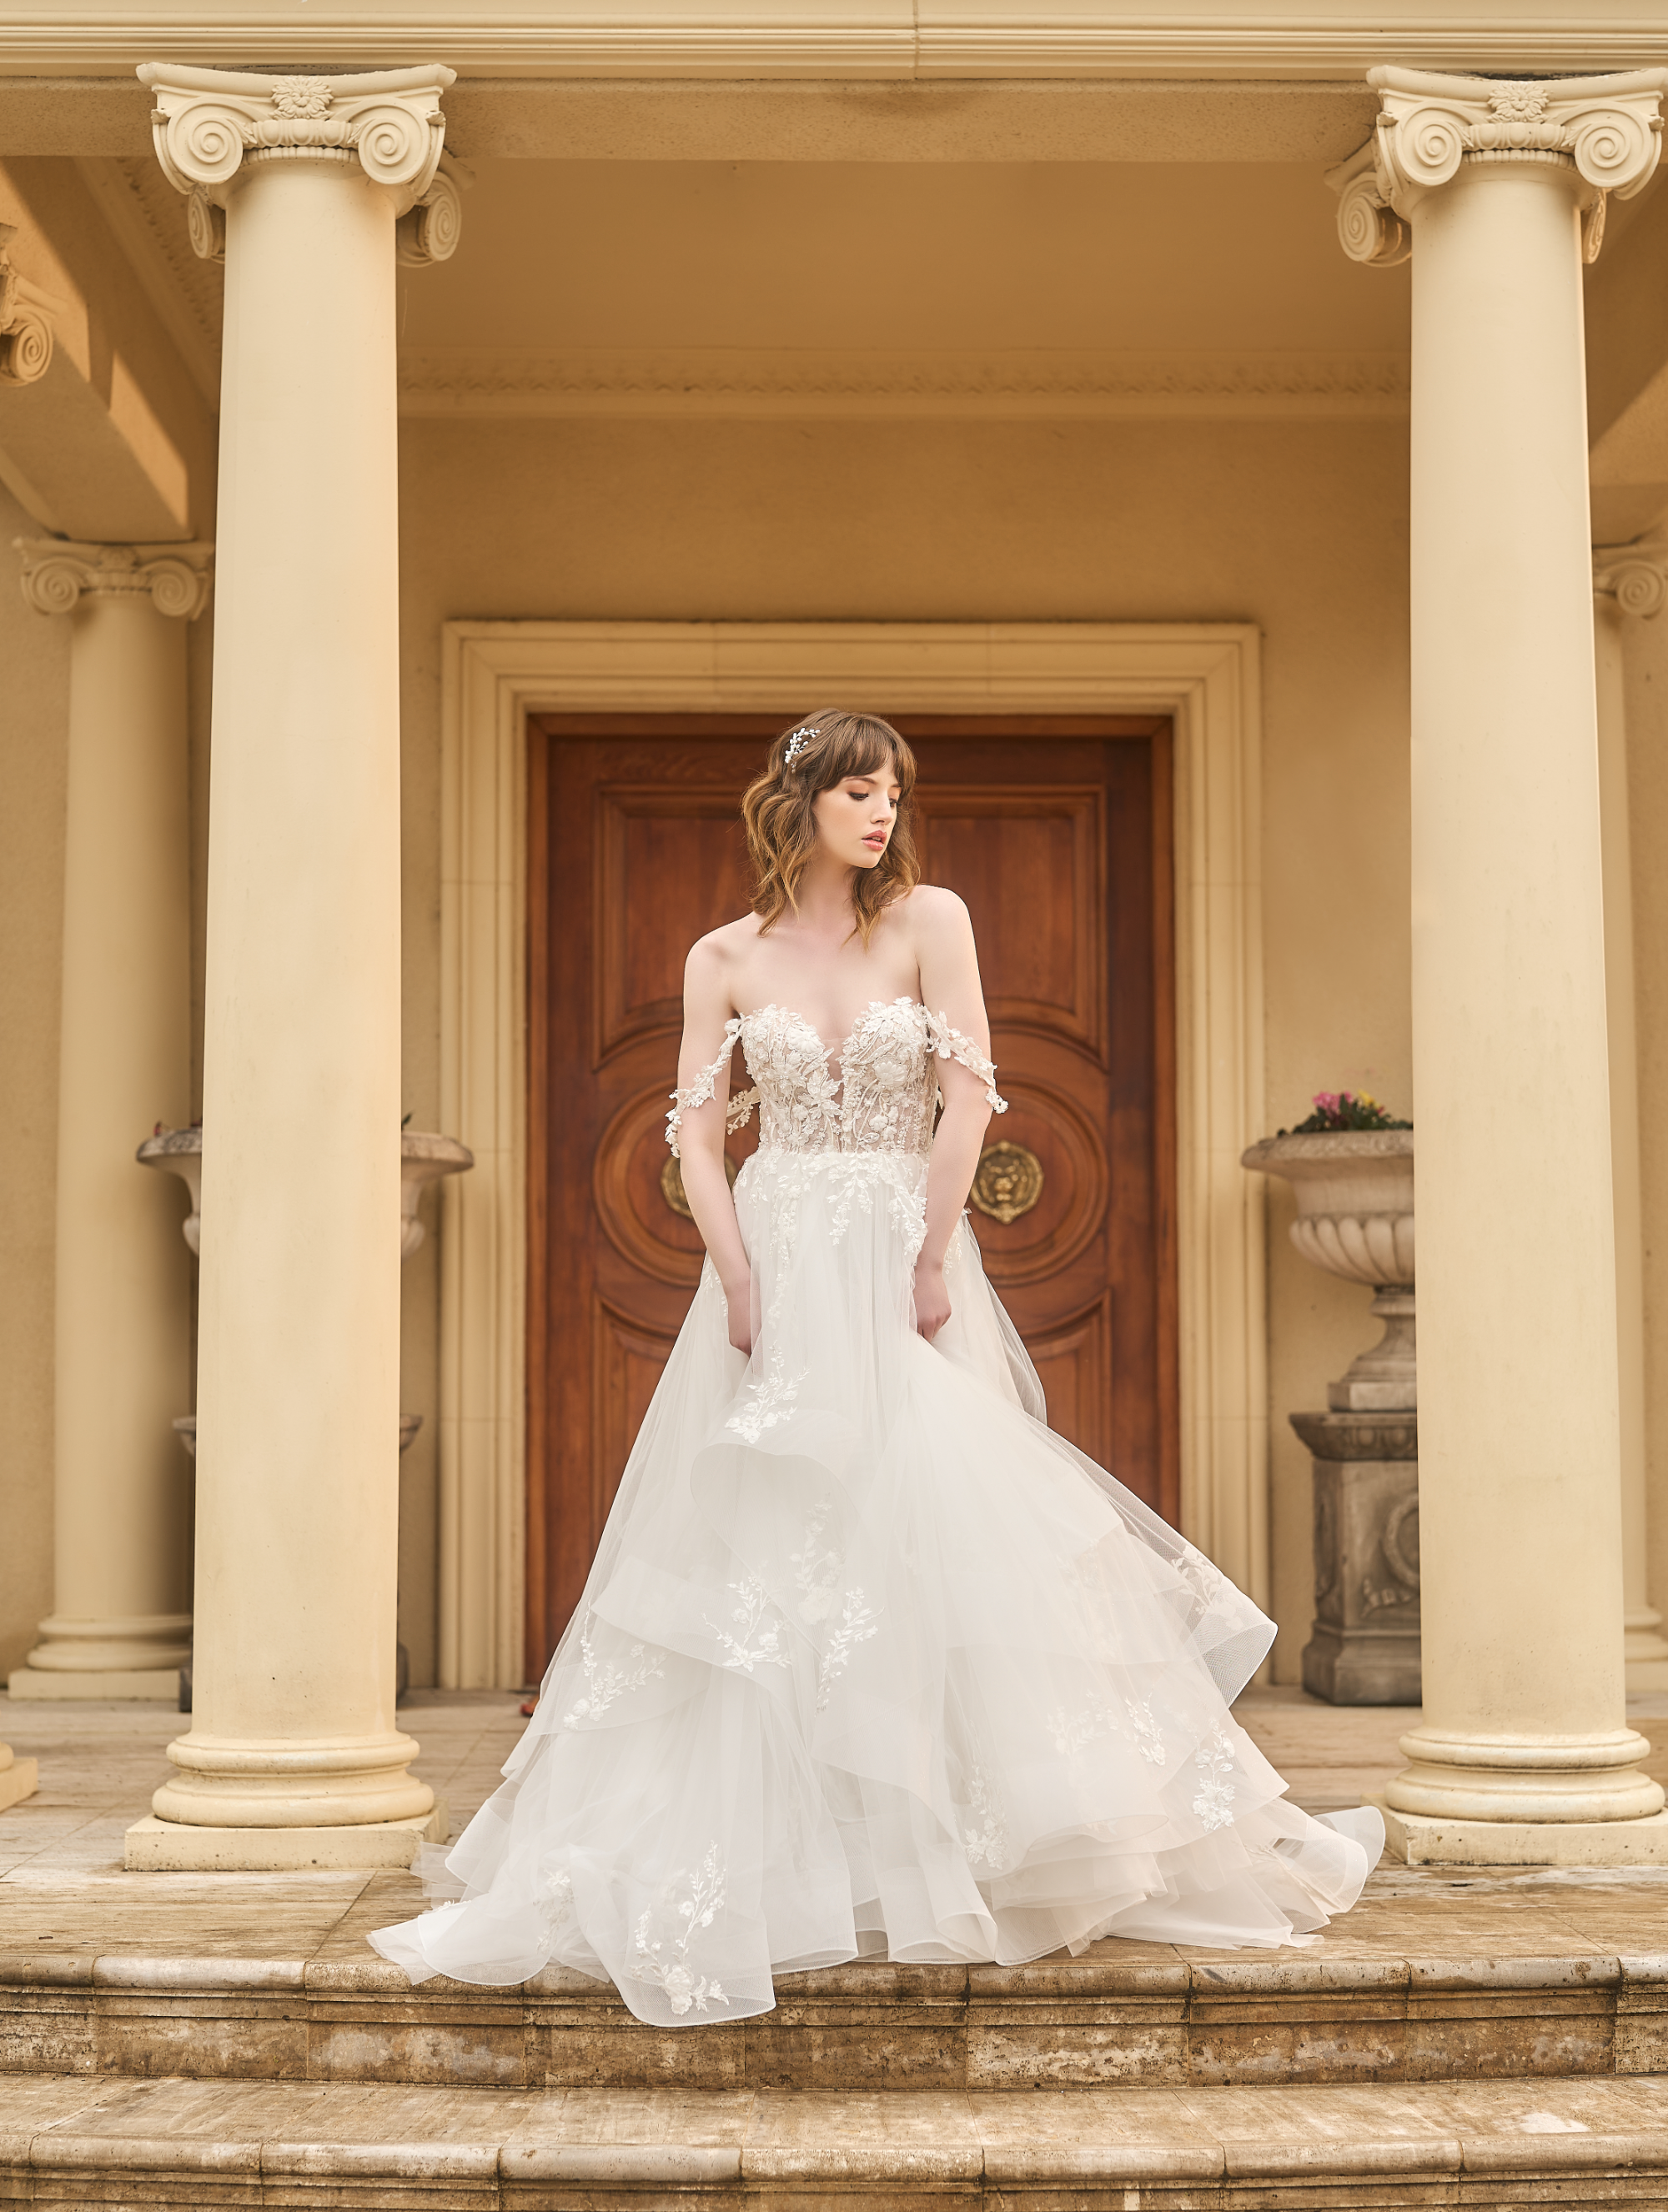 Tess is an a-line wedding gown with plunging sweetheart neckline. Asymmetrical tulle skirt creates volume. Delicate floral off-the-shoulder straps match the lace bodice and applique on skirt.